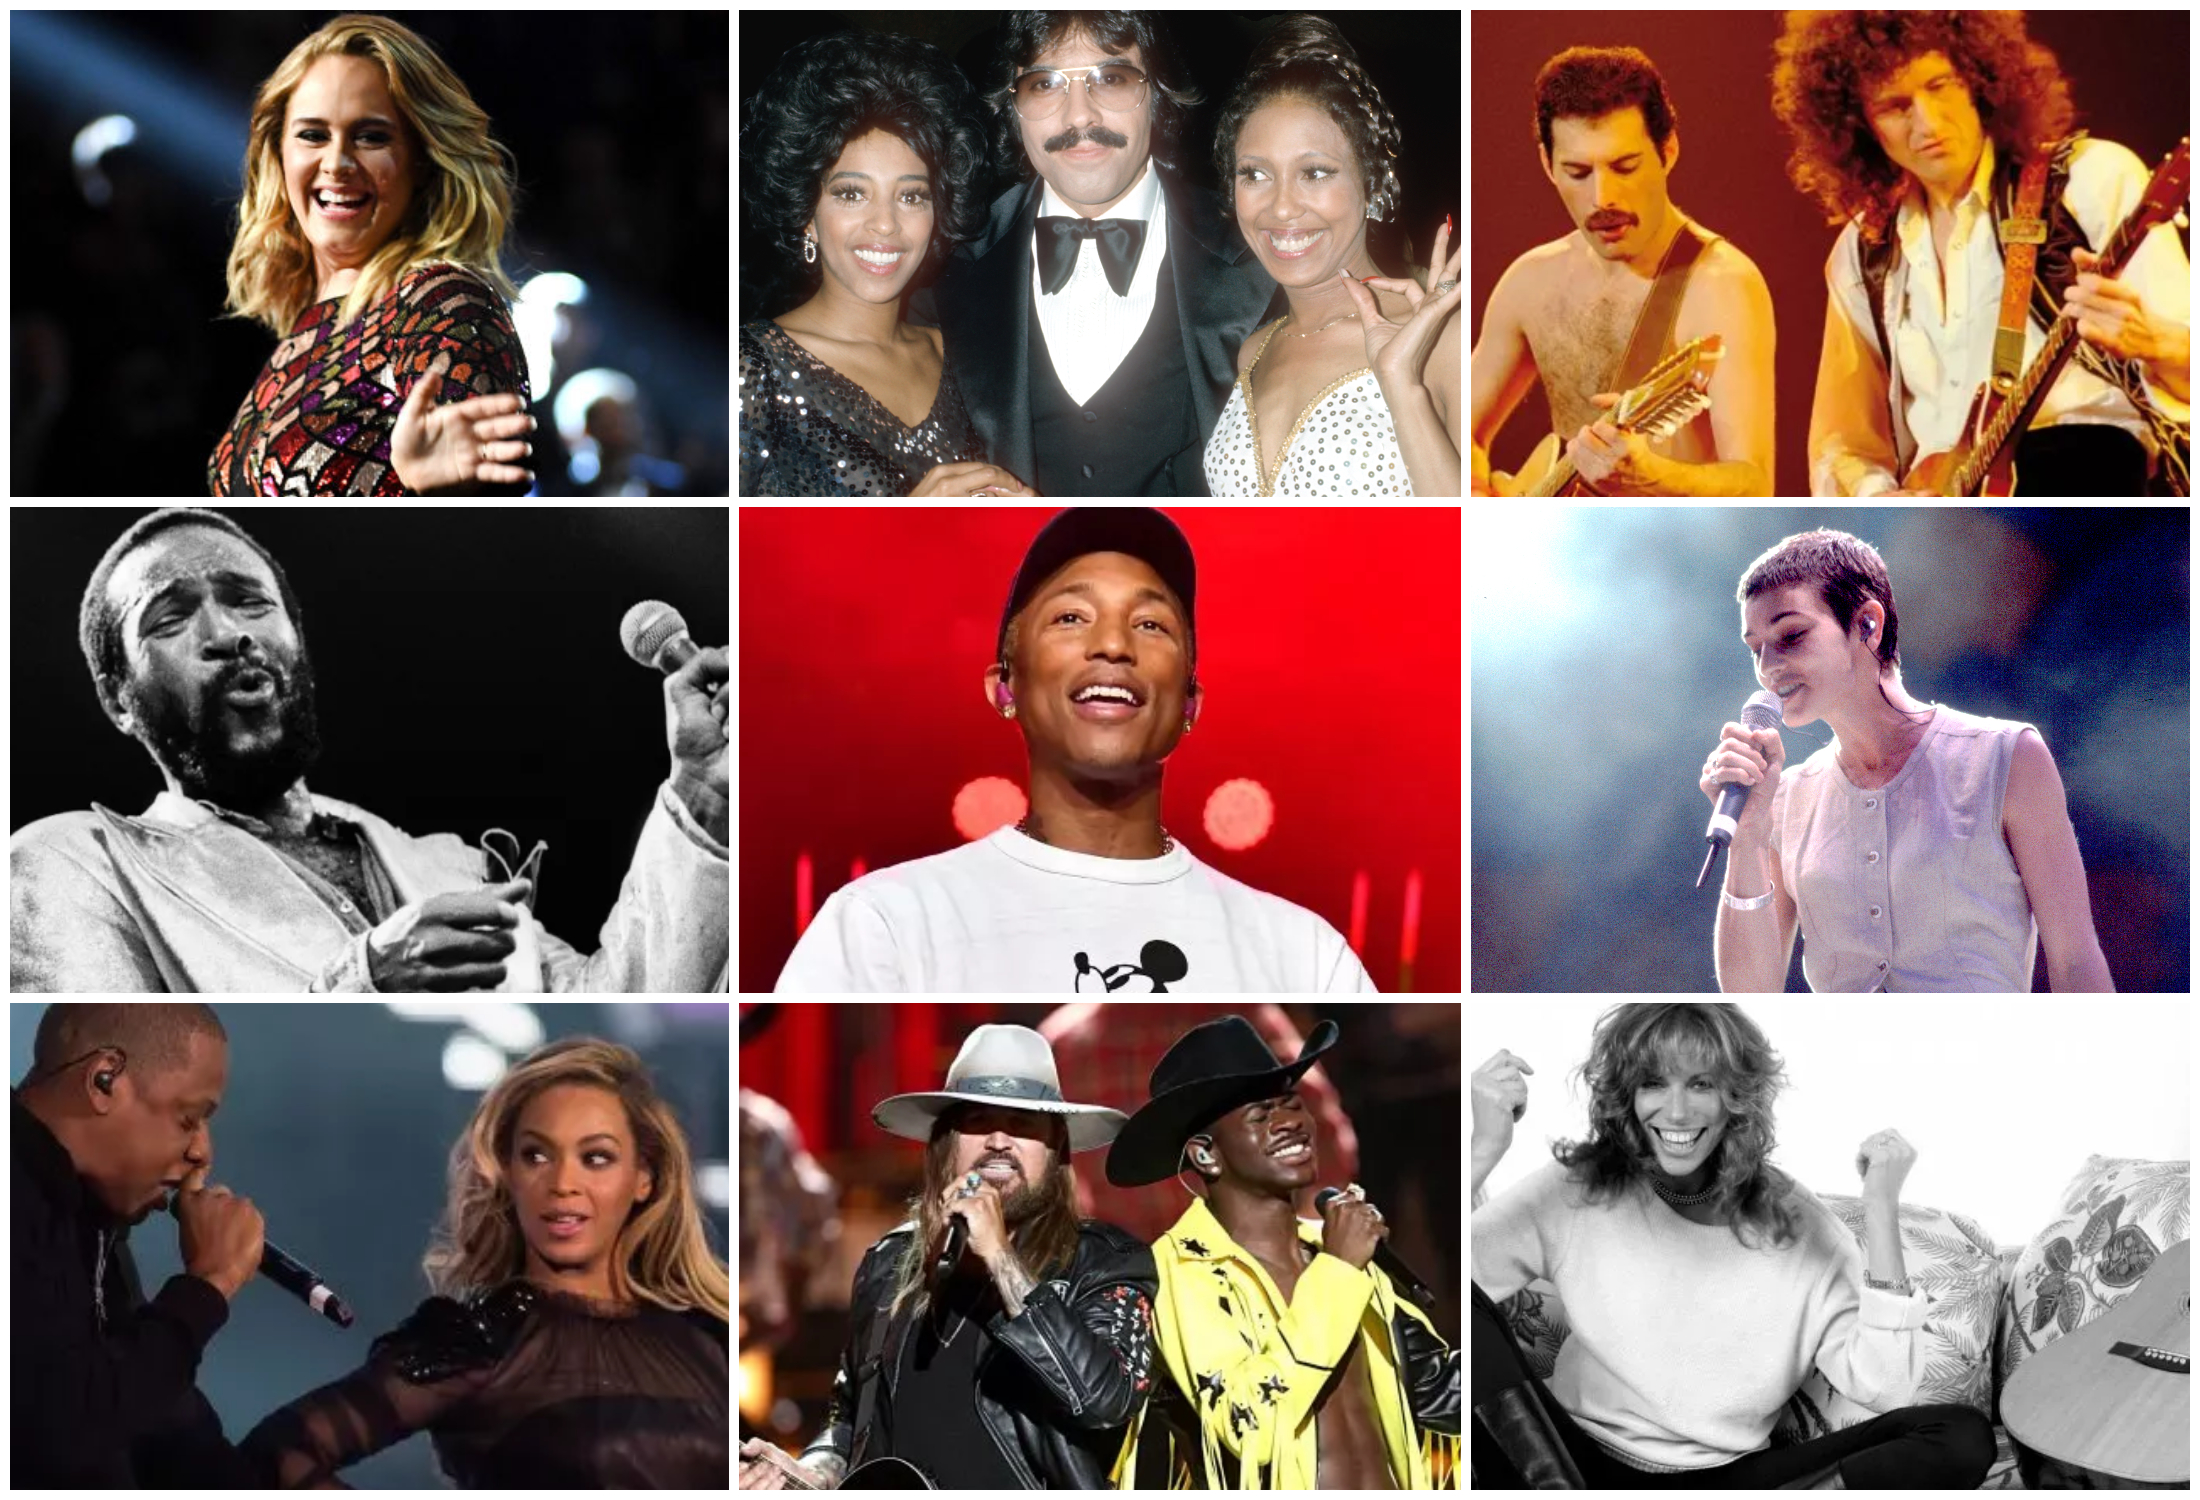 Is Today's Music Bad? A 50-Year Top 10 Comparison 